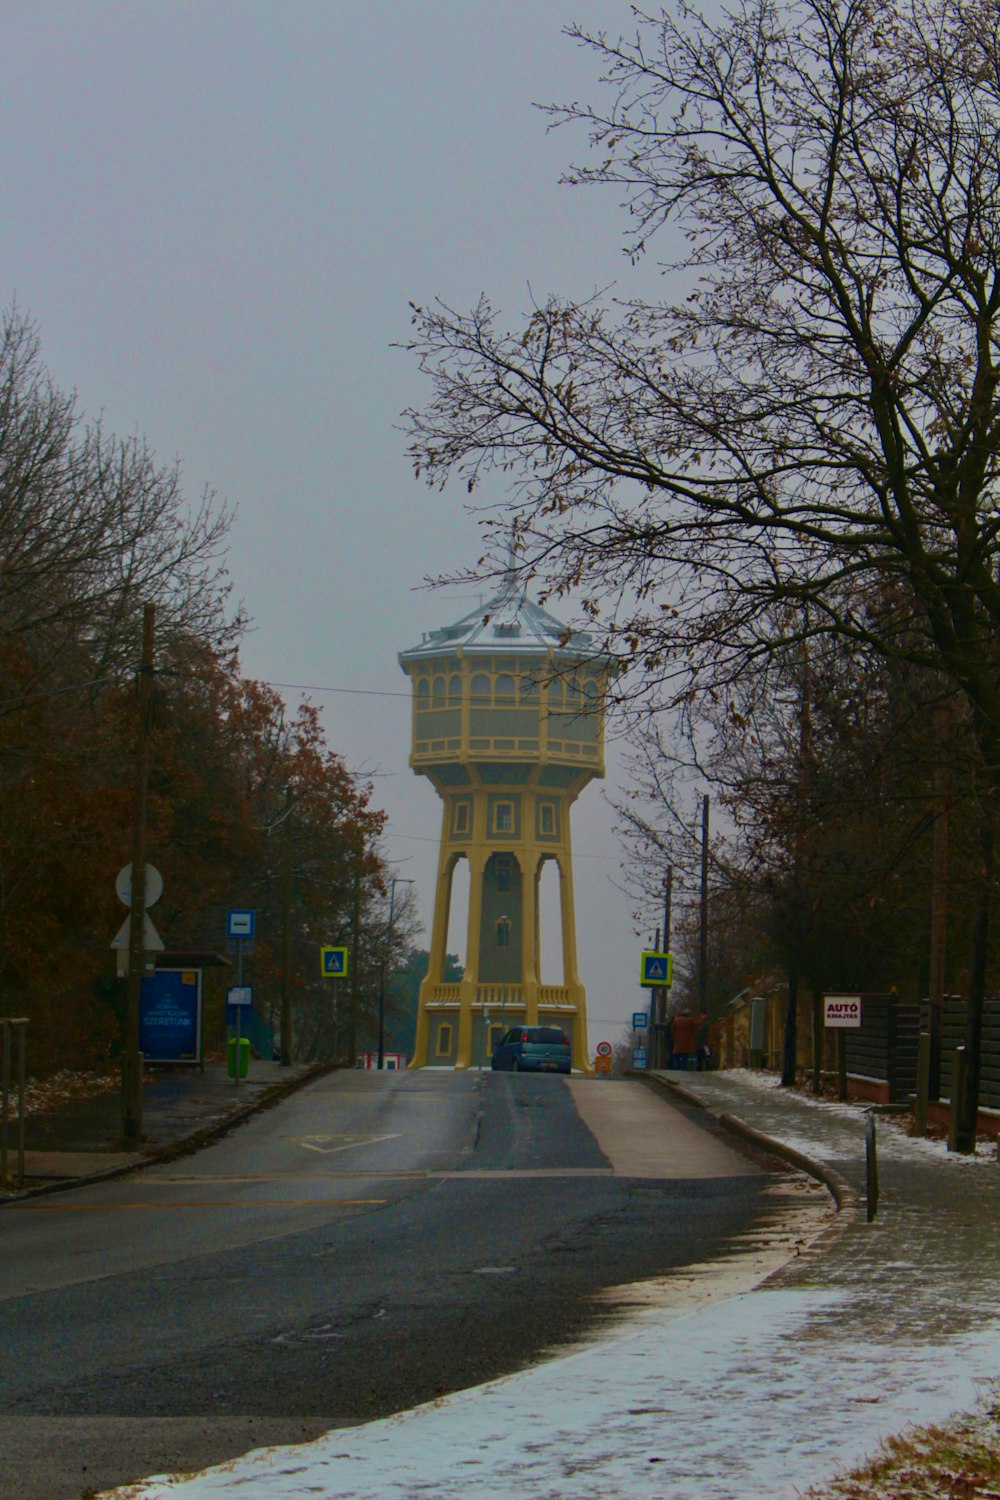 a yellow water tower sitting on the side of a road